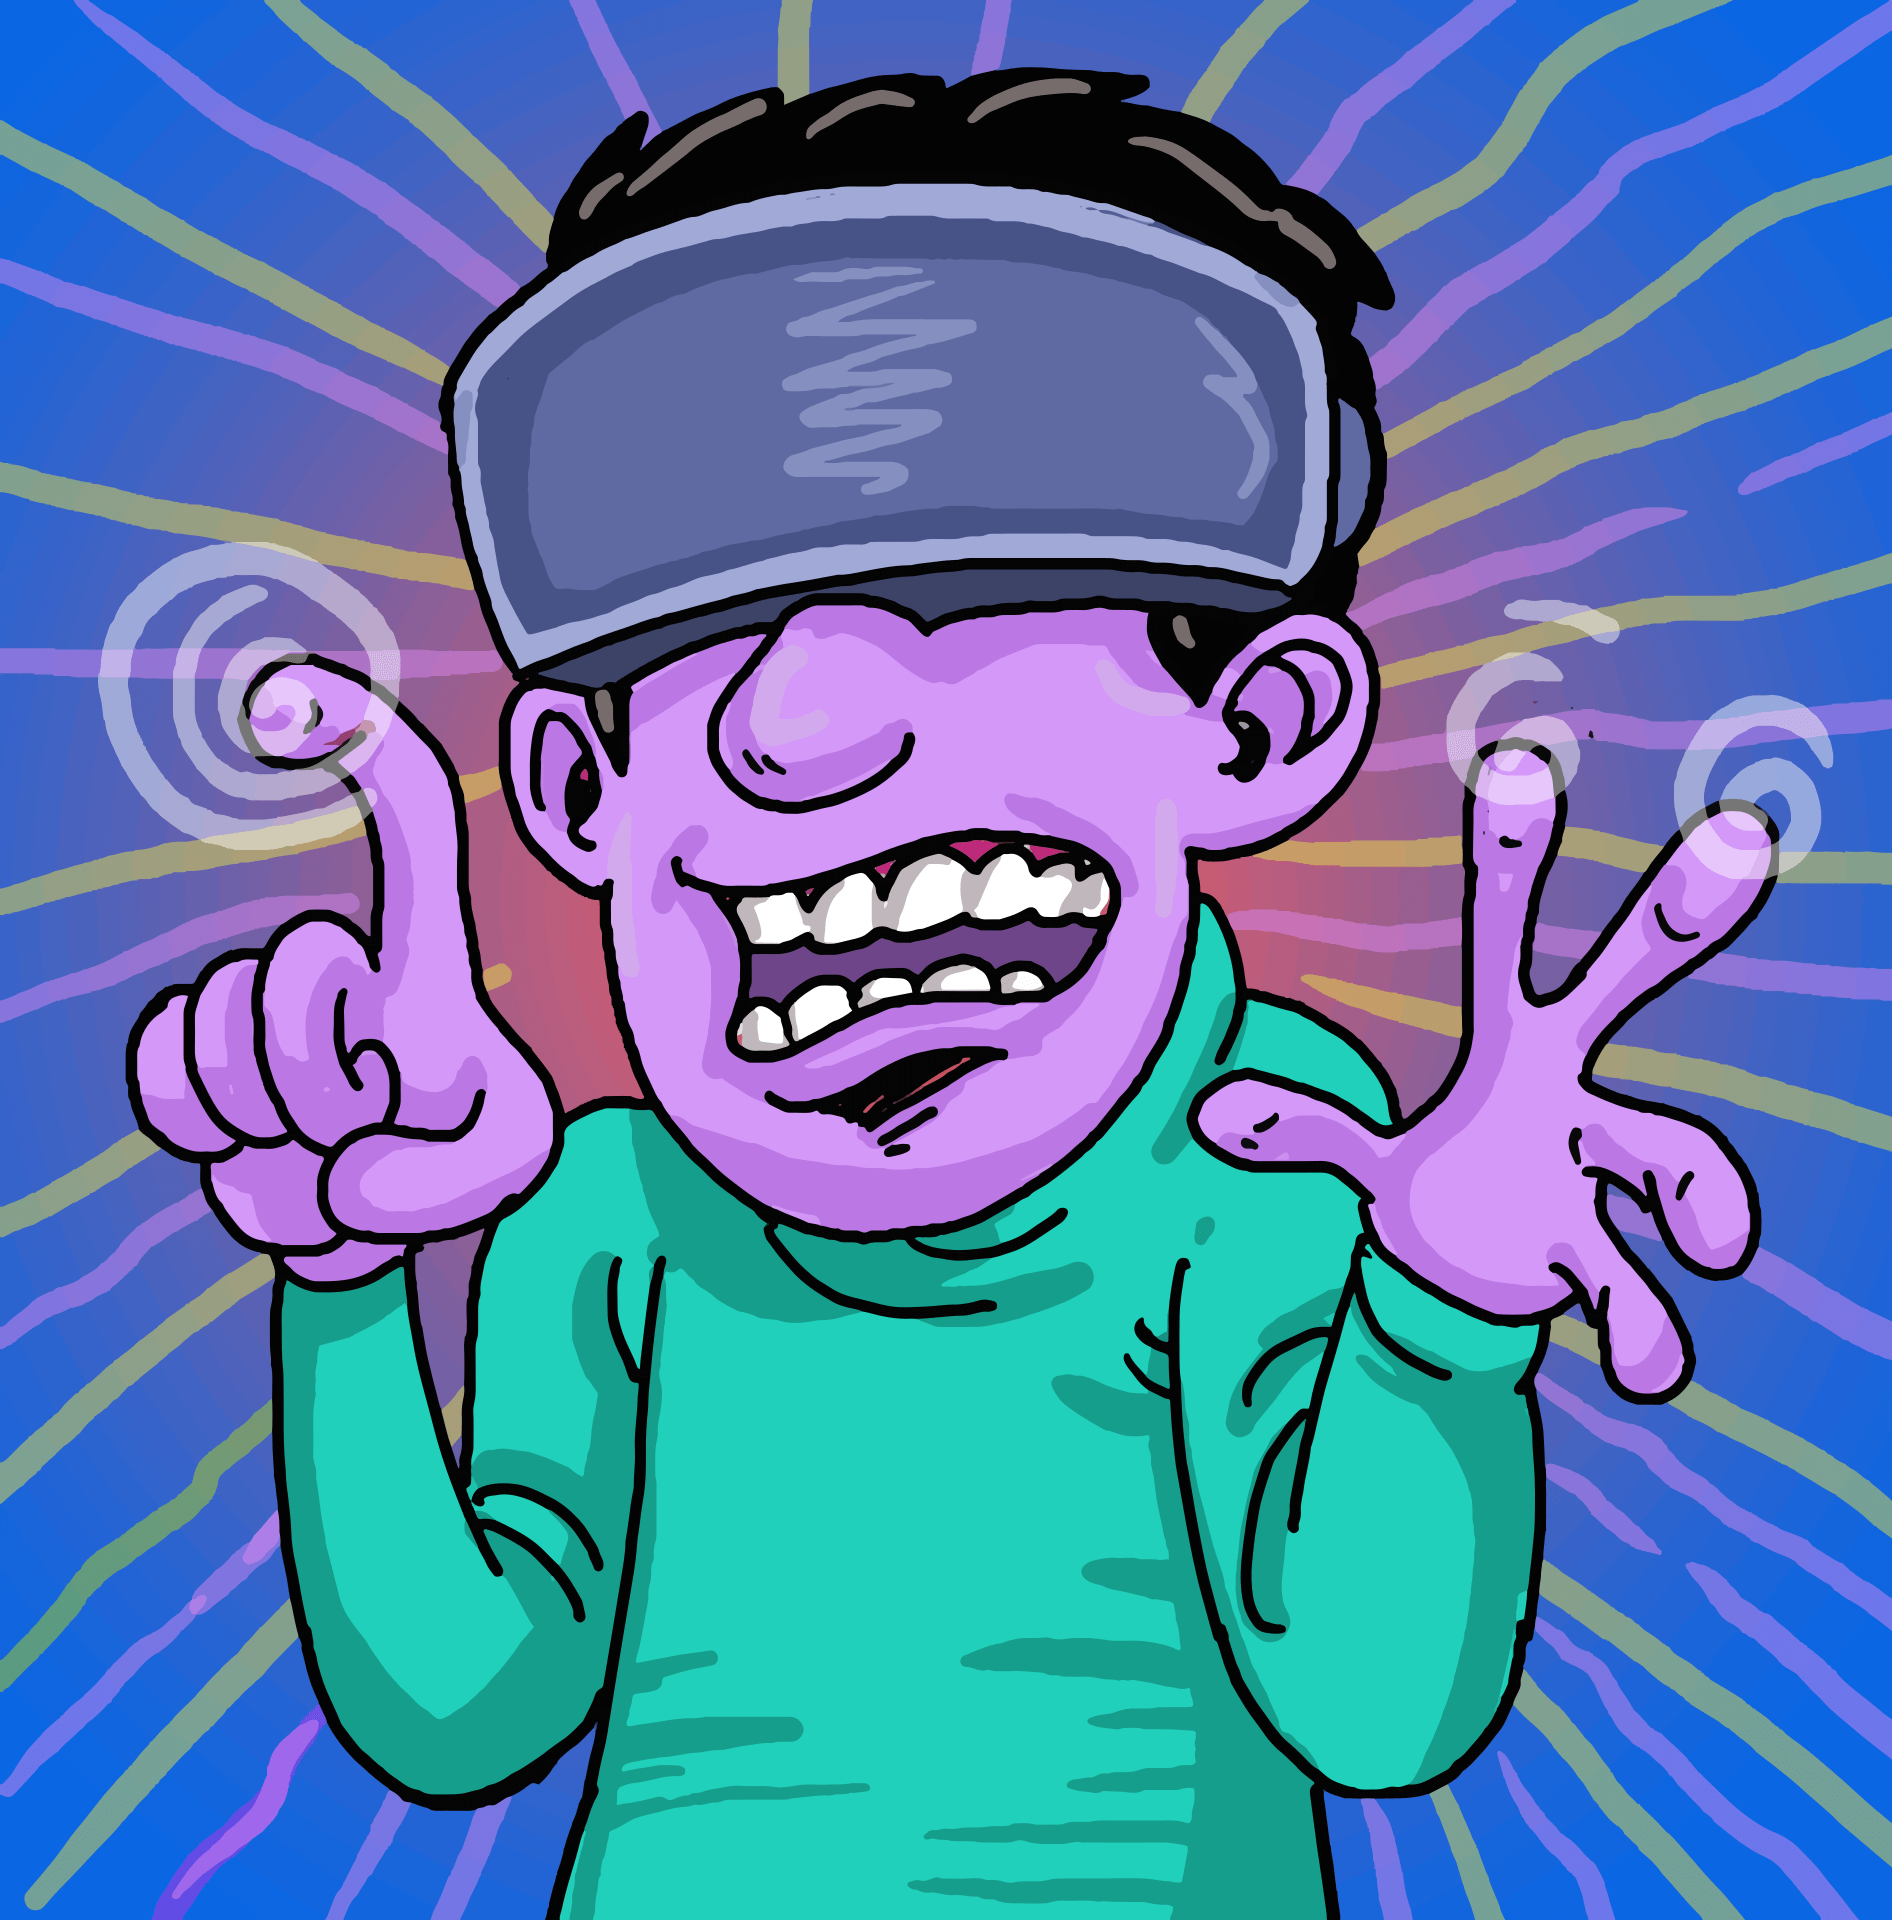 Cartoon of a man with VR box